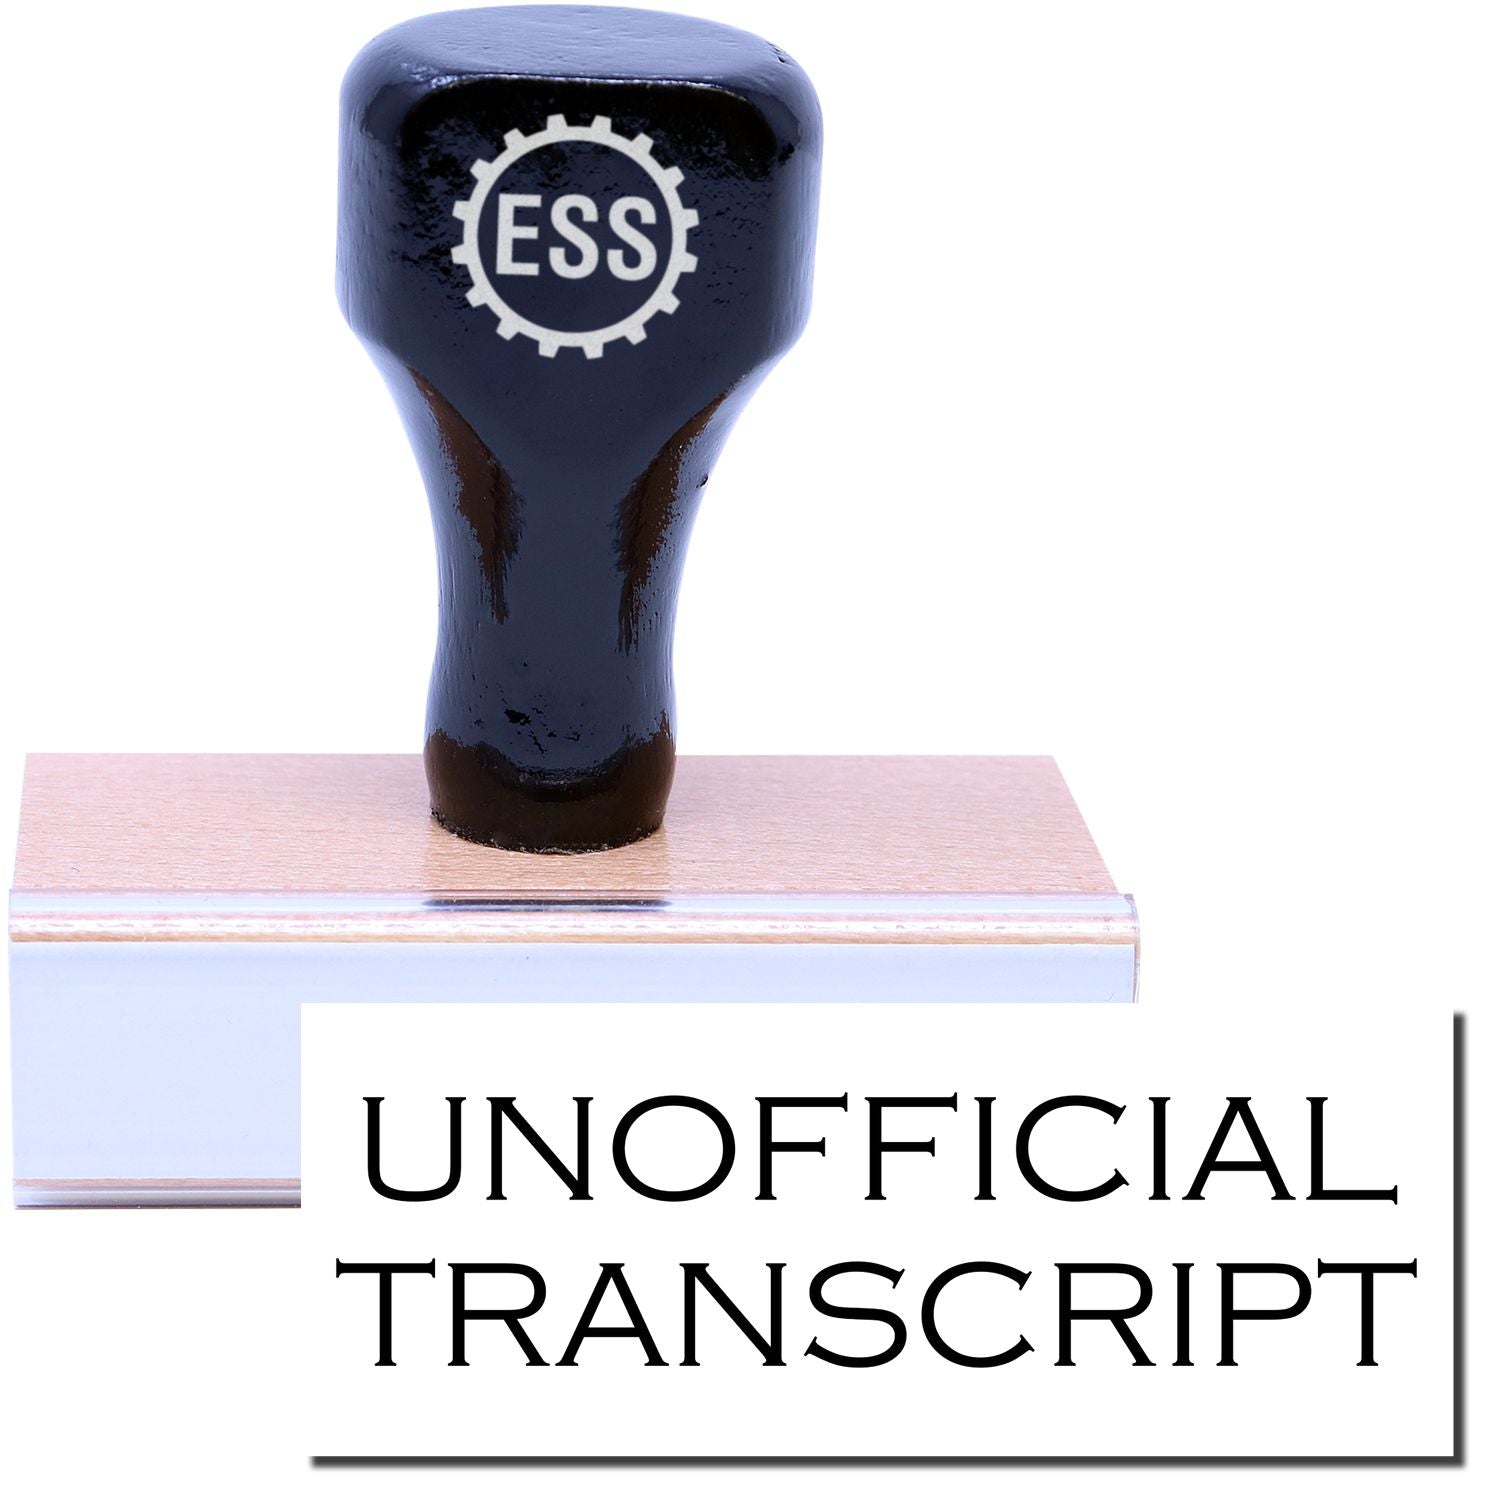 A stock office rubber stamp with a stamped image showing how the text "UNOFFICIAL TRANSCRIPT" in a large font is displayed after stamping.